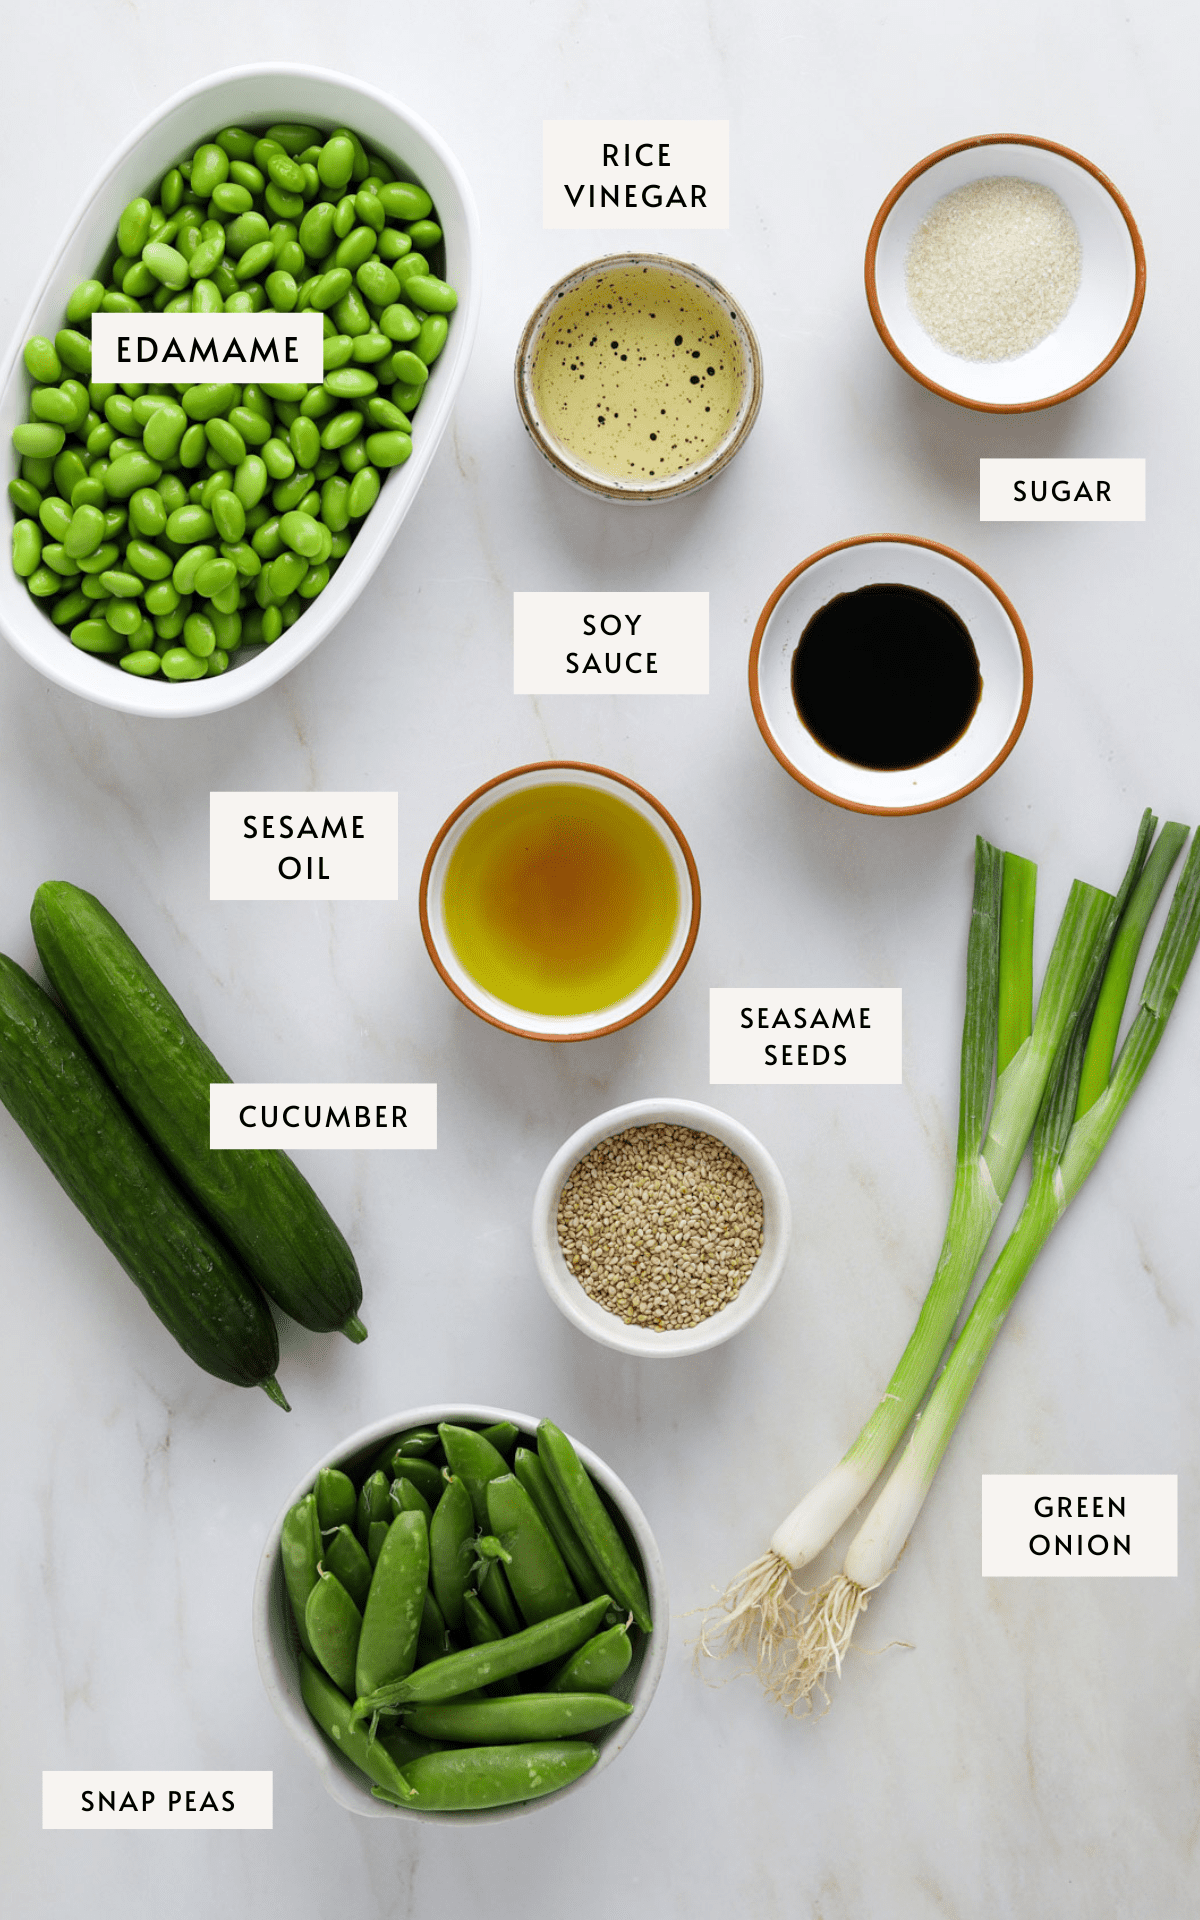 a small white bowl of shelled edamame, small dishes of vinegar, oil, sugar and sesame seeds, 2 green onions, a bowl of snap peas and two cucumbers.